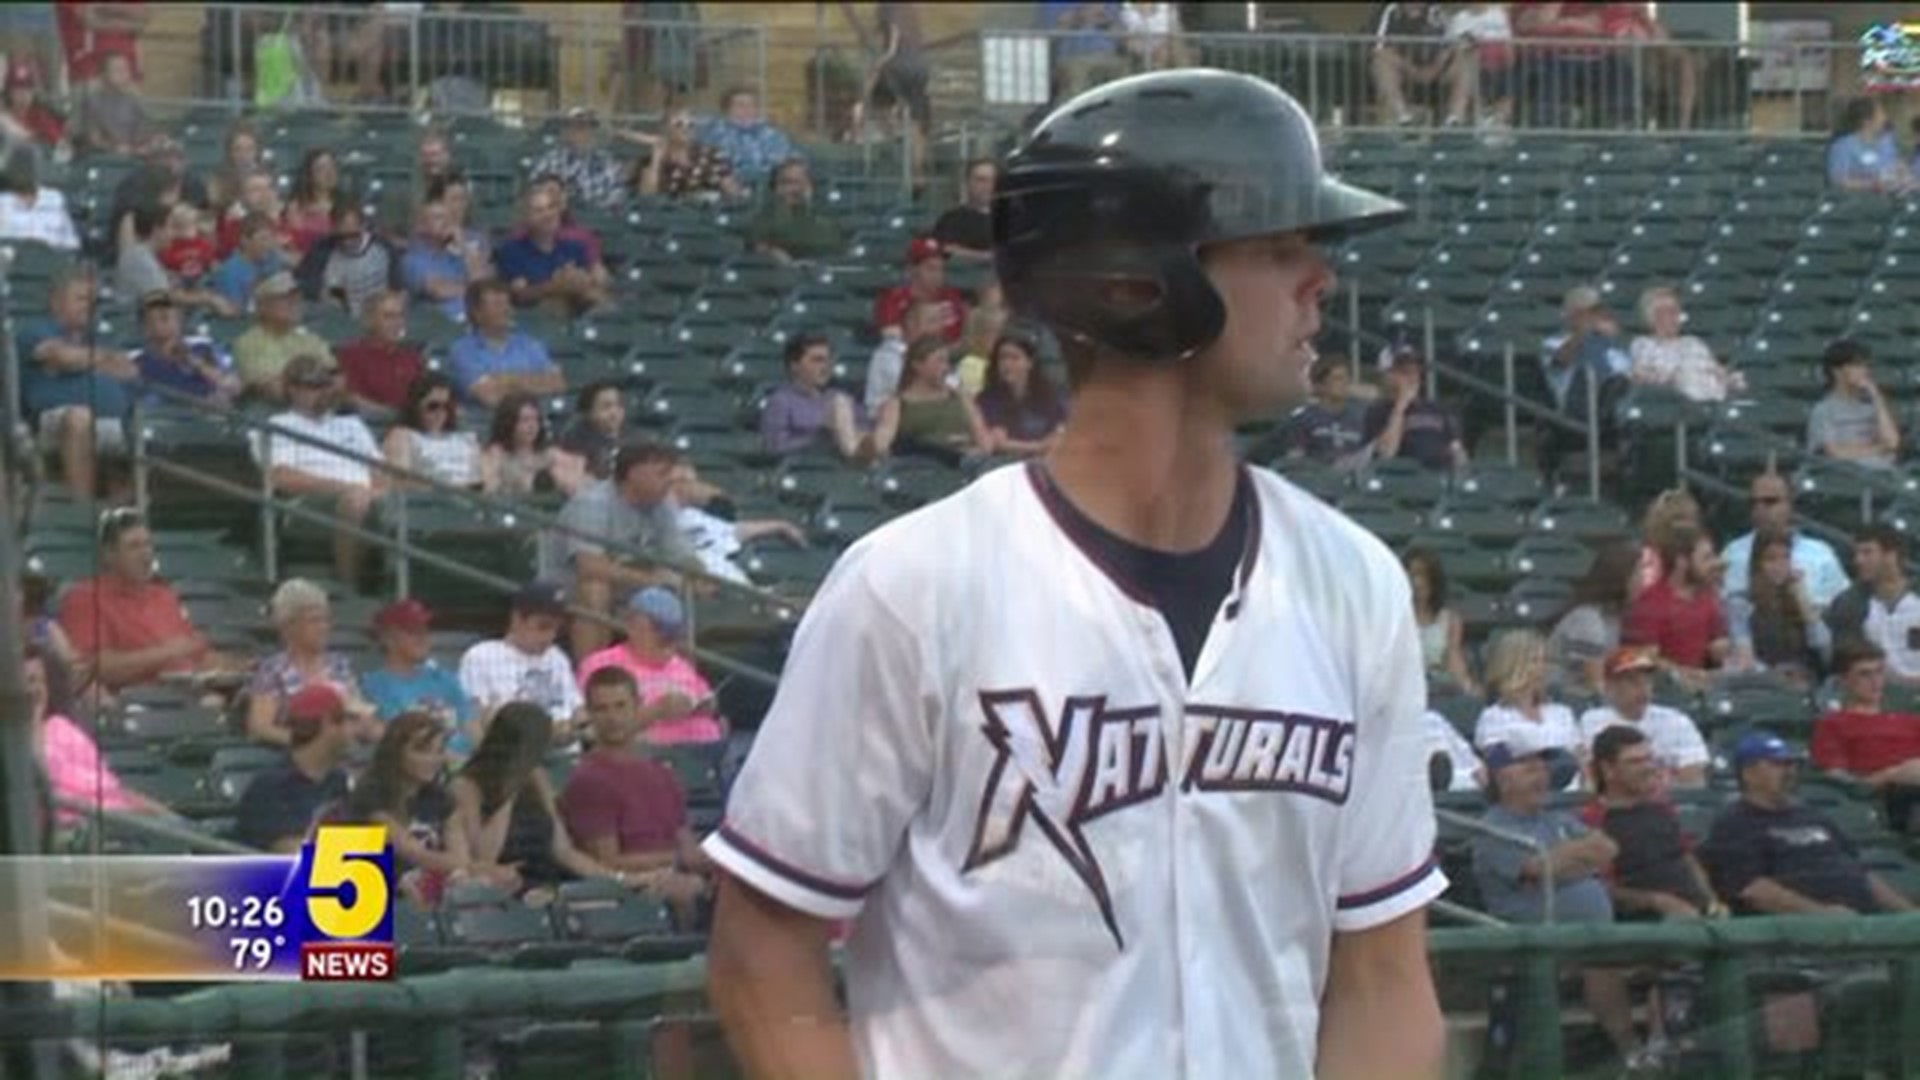 Starling Hits For Cycle For Naturals